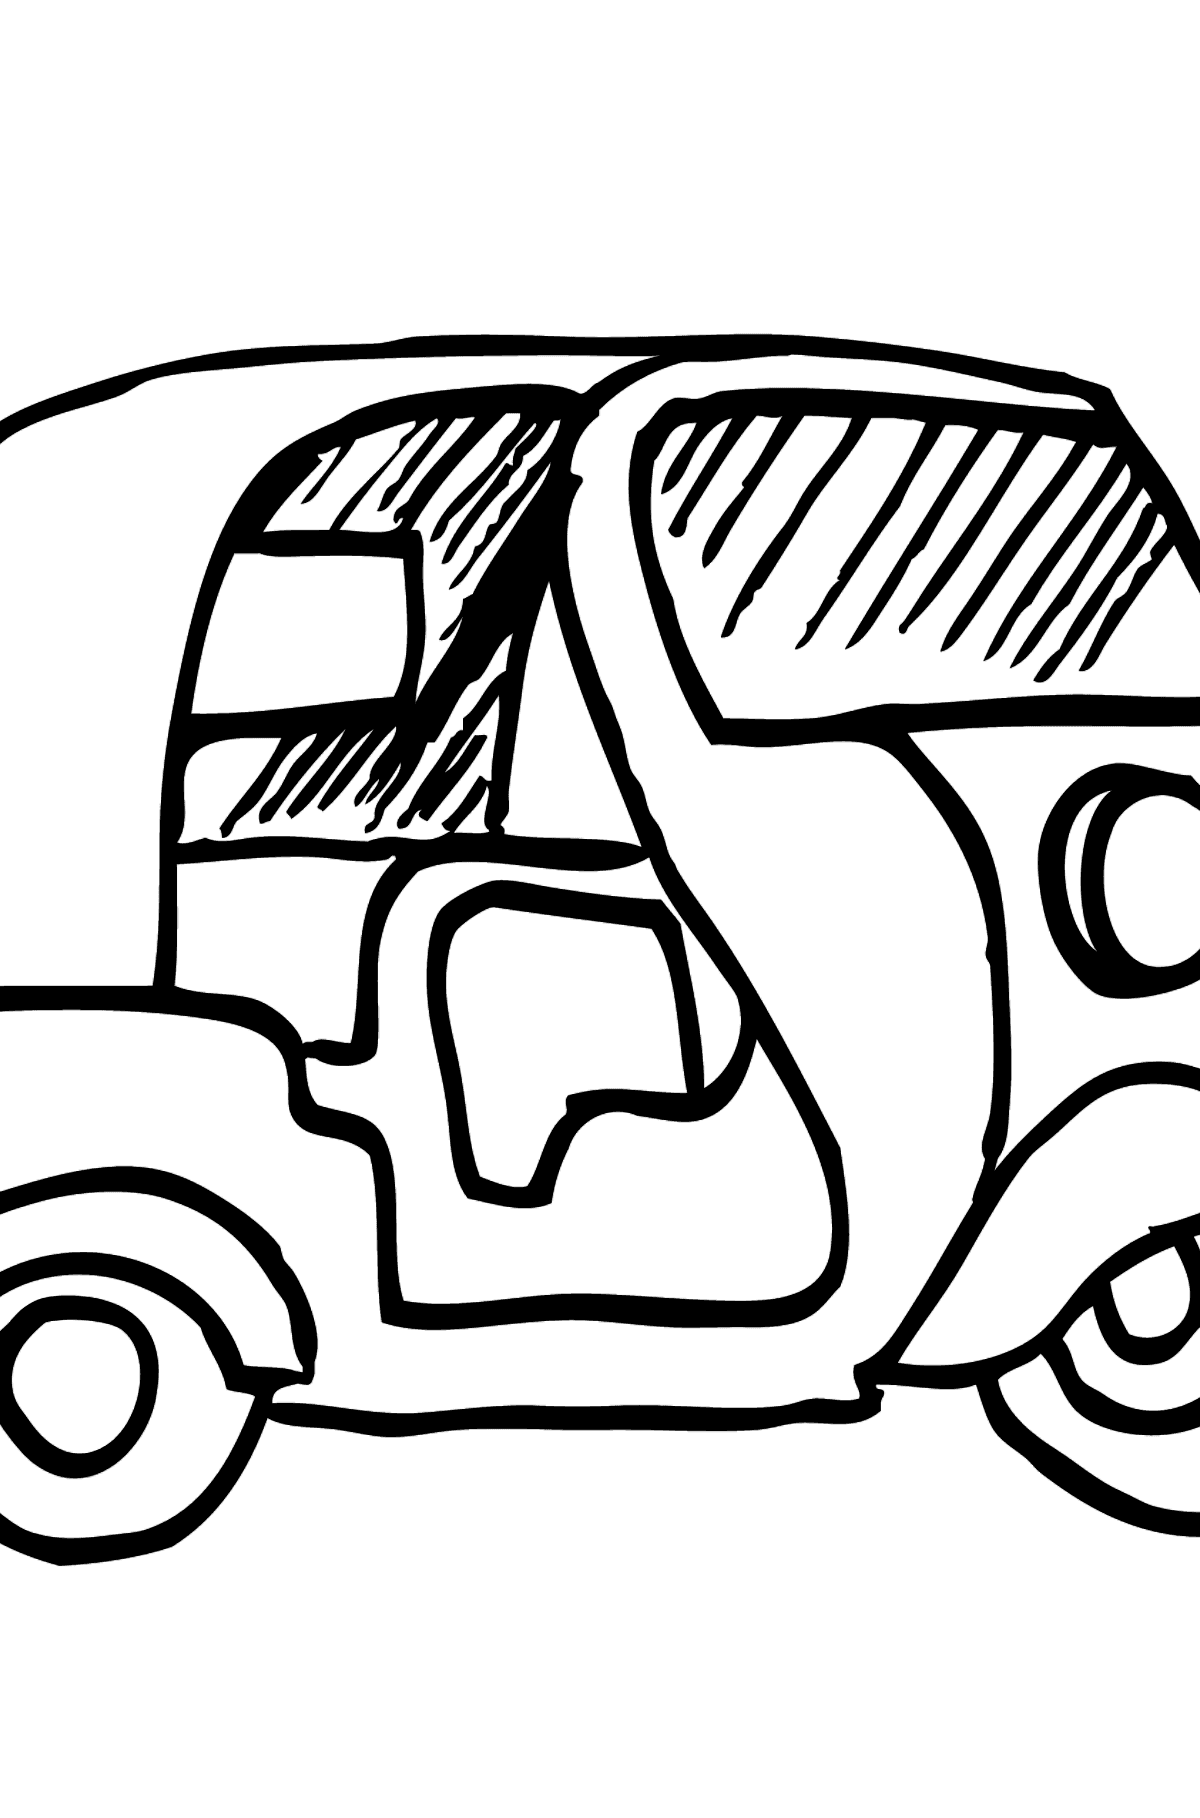 Coloring Page - A Moped is Carrying Mail - Coloring Pages for Kids